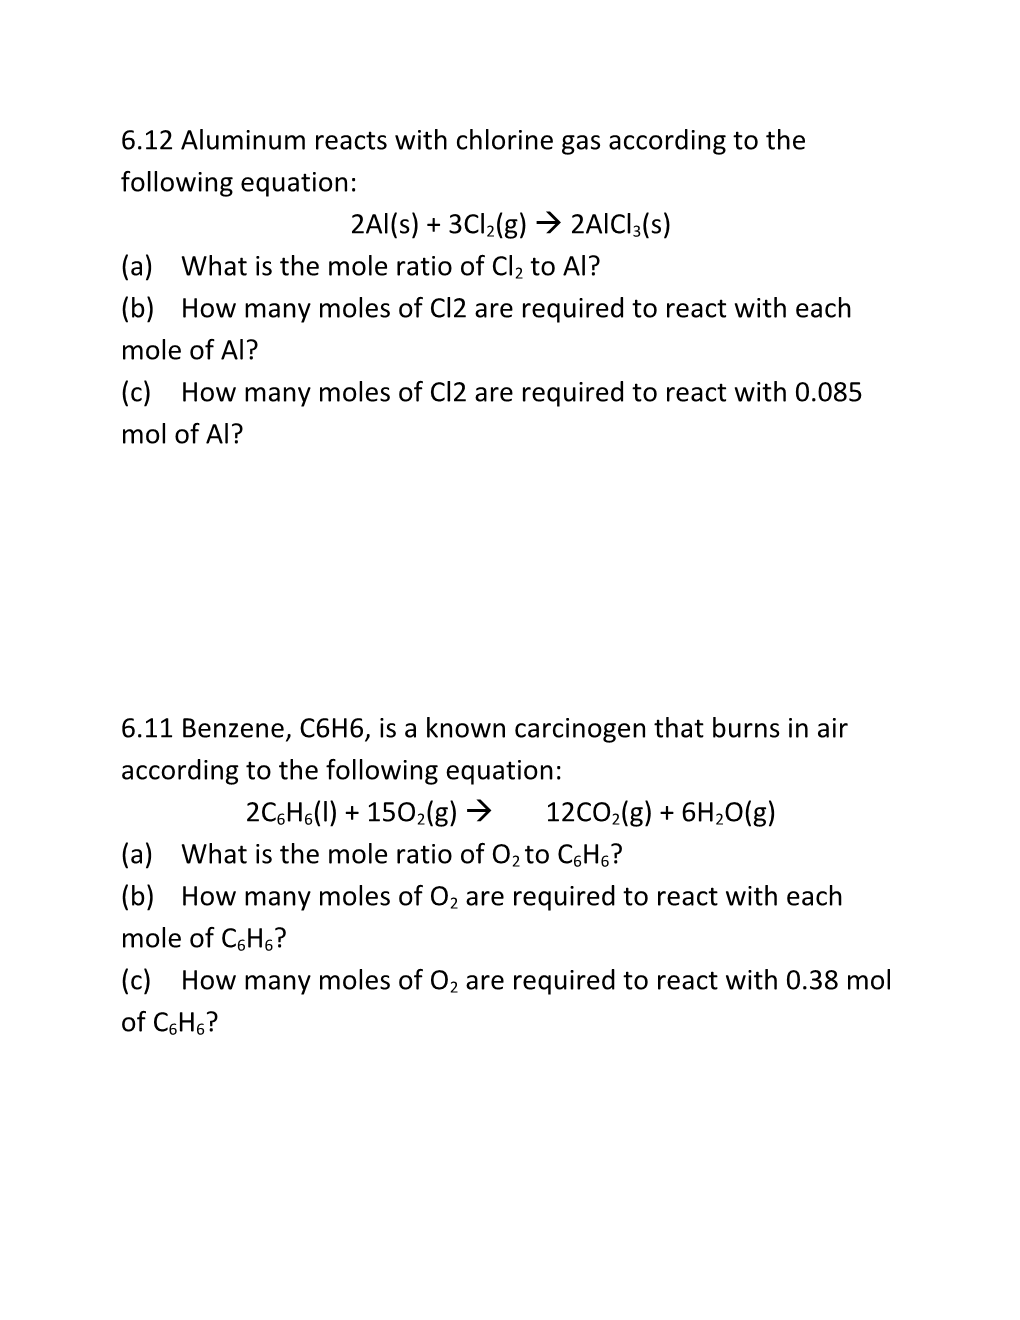 6.12 Aluminum Reacts with Chlorine Gas According to the Following Equation